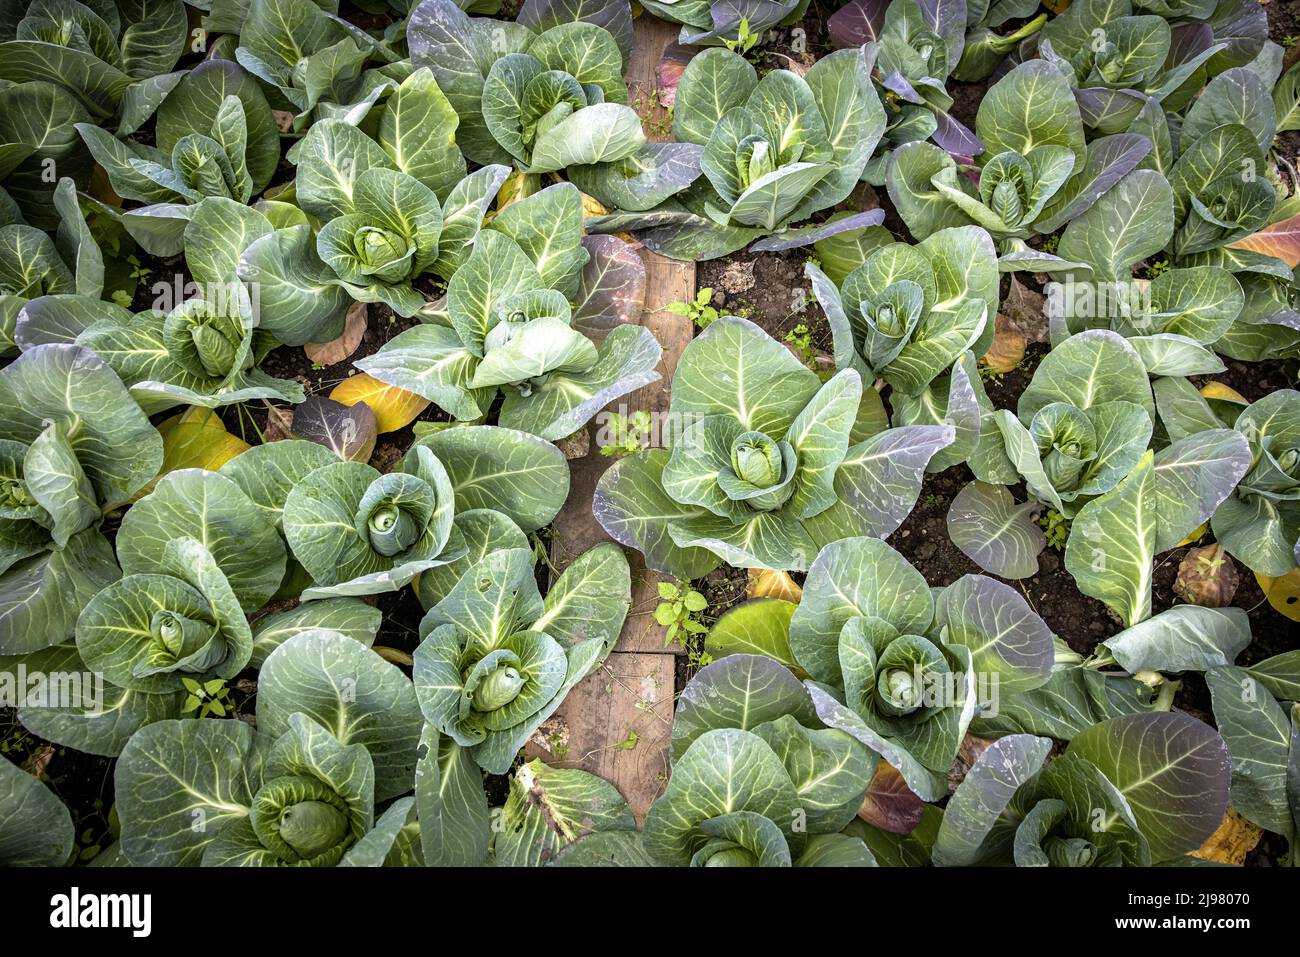 2022-05-21 12:10:37 UTRECHT - Cabbage in urban agriculture initiative Koningshof. There is a growing movement against the current food industry with more and more local products appearing in restaurants and shops. ANP RAMON VAN FLYMEN netherlands out - belgium out Stock Photo